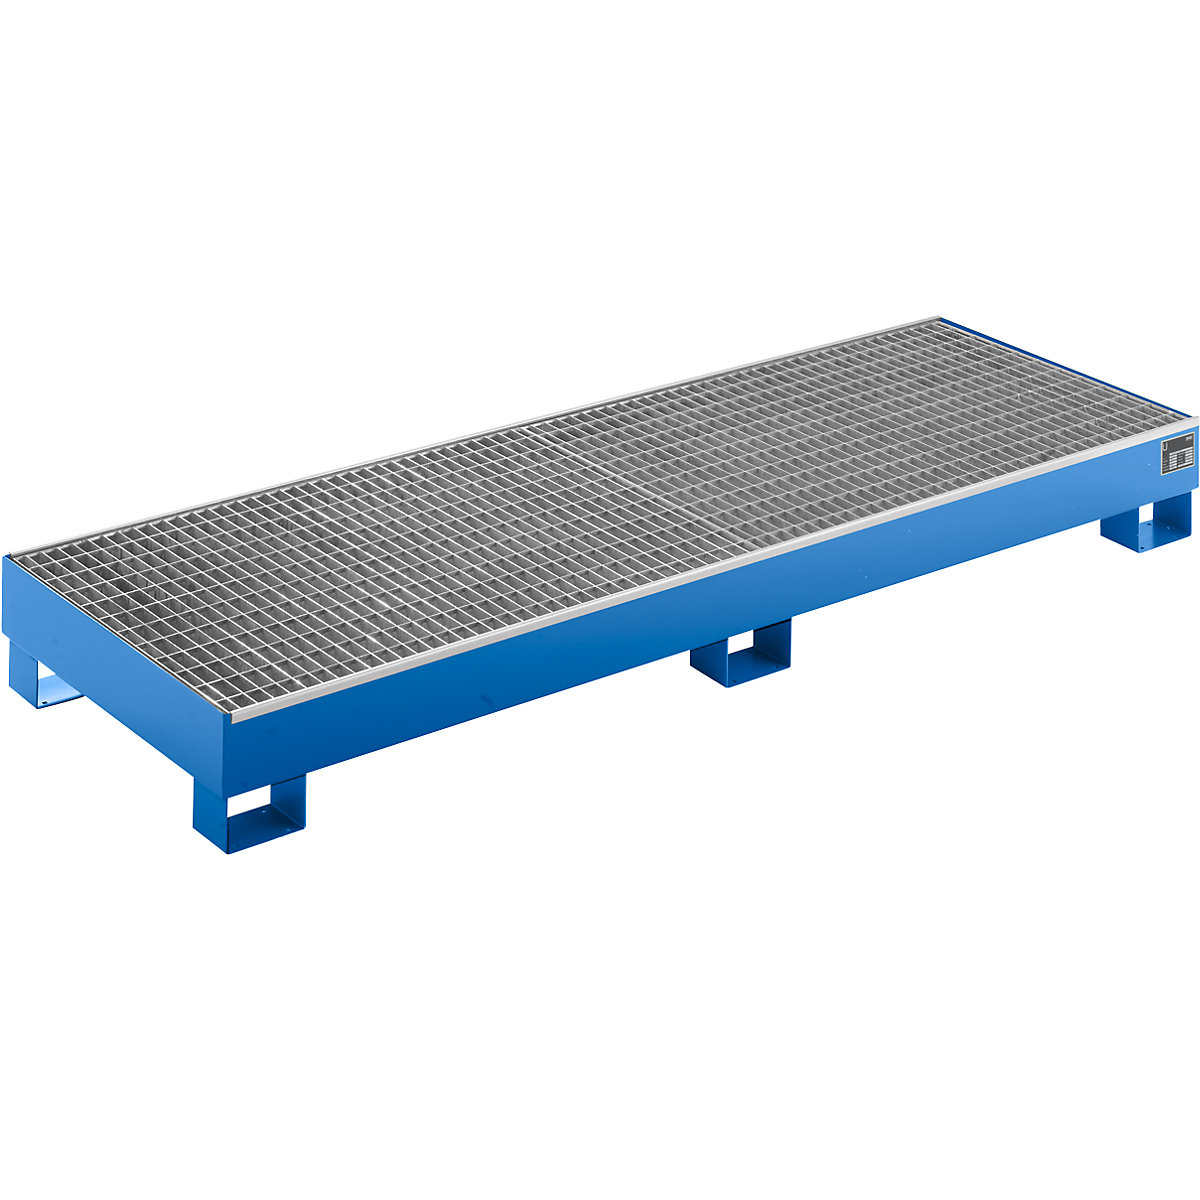 EUROKRAFTbasic – Sump tray made from sheet steel, LxWxH 2400 x 800 x 250 mm, blue RAL 5012, with grate